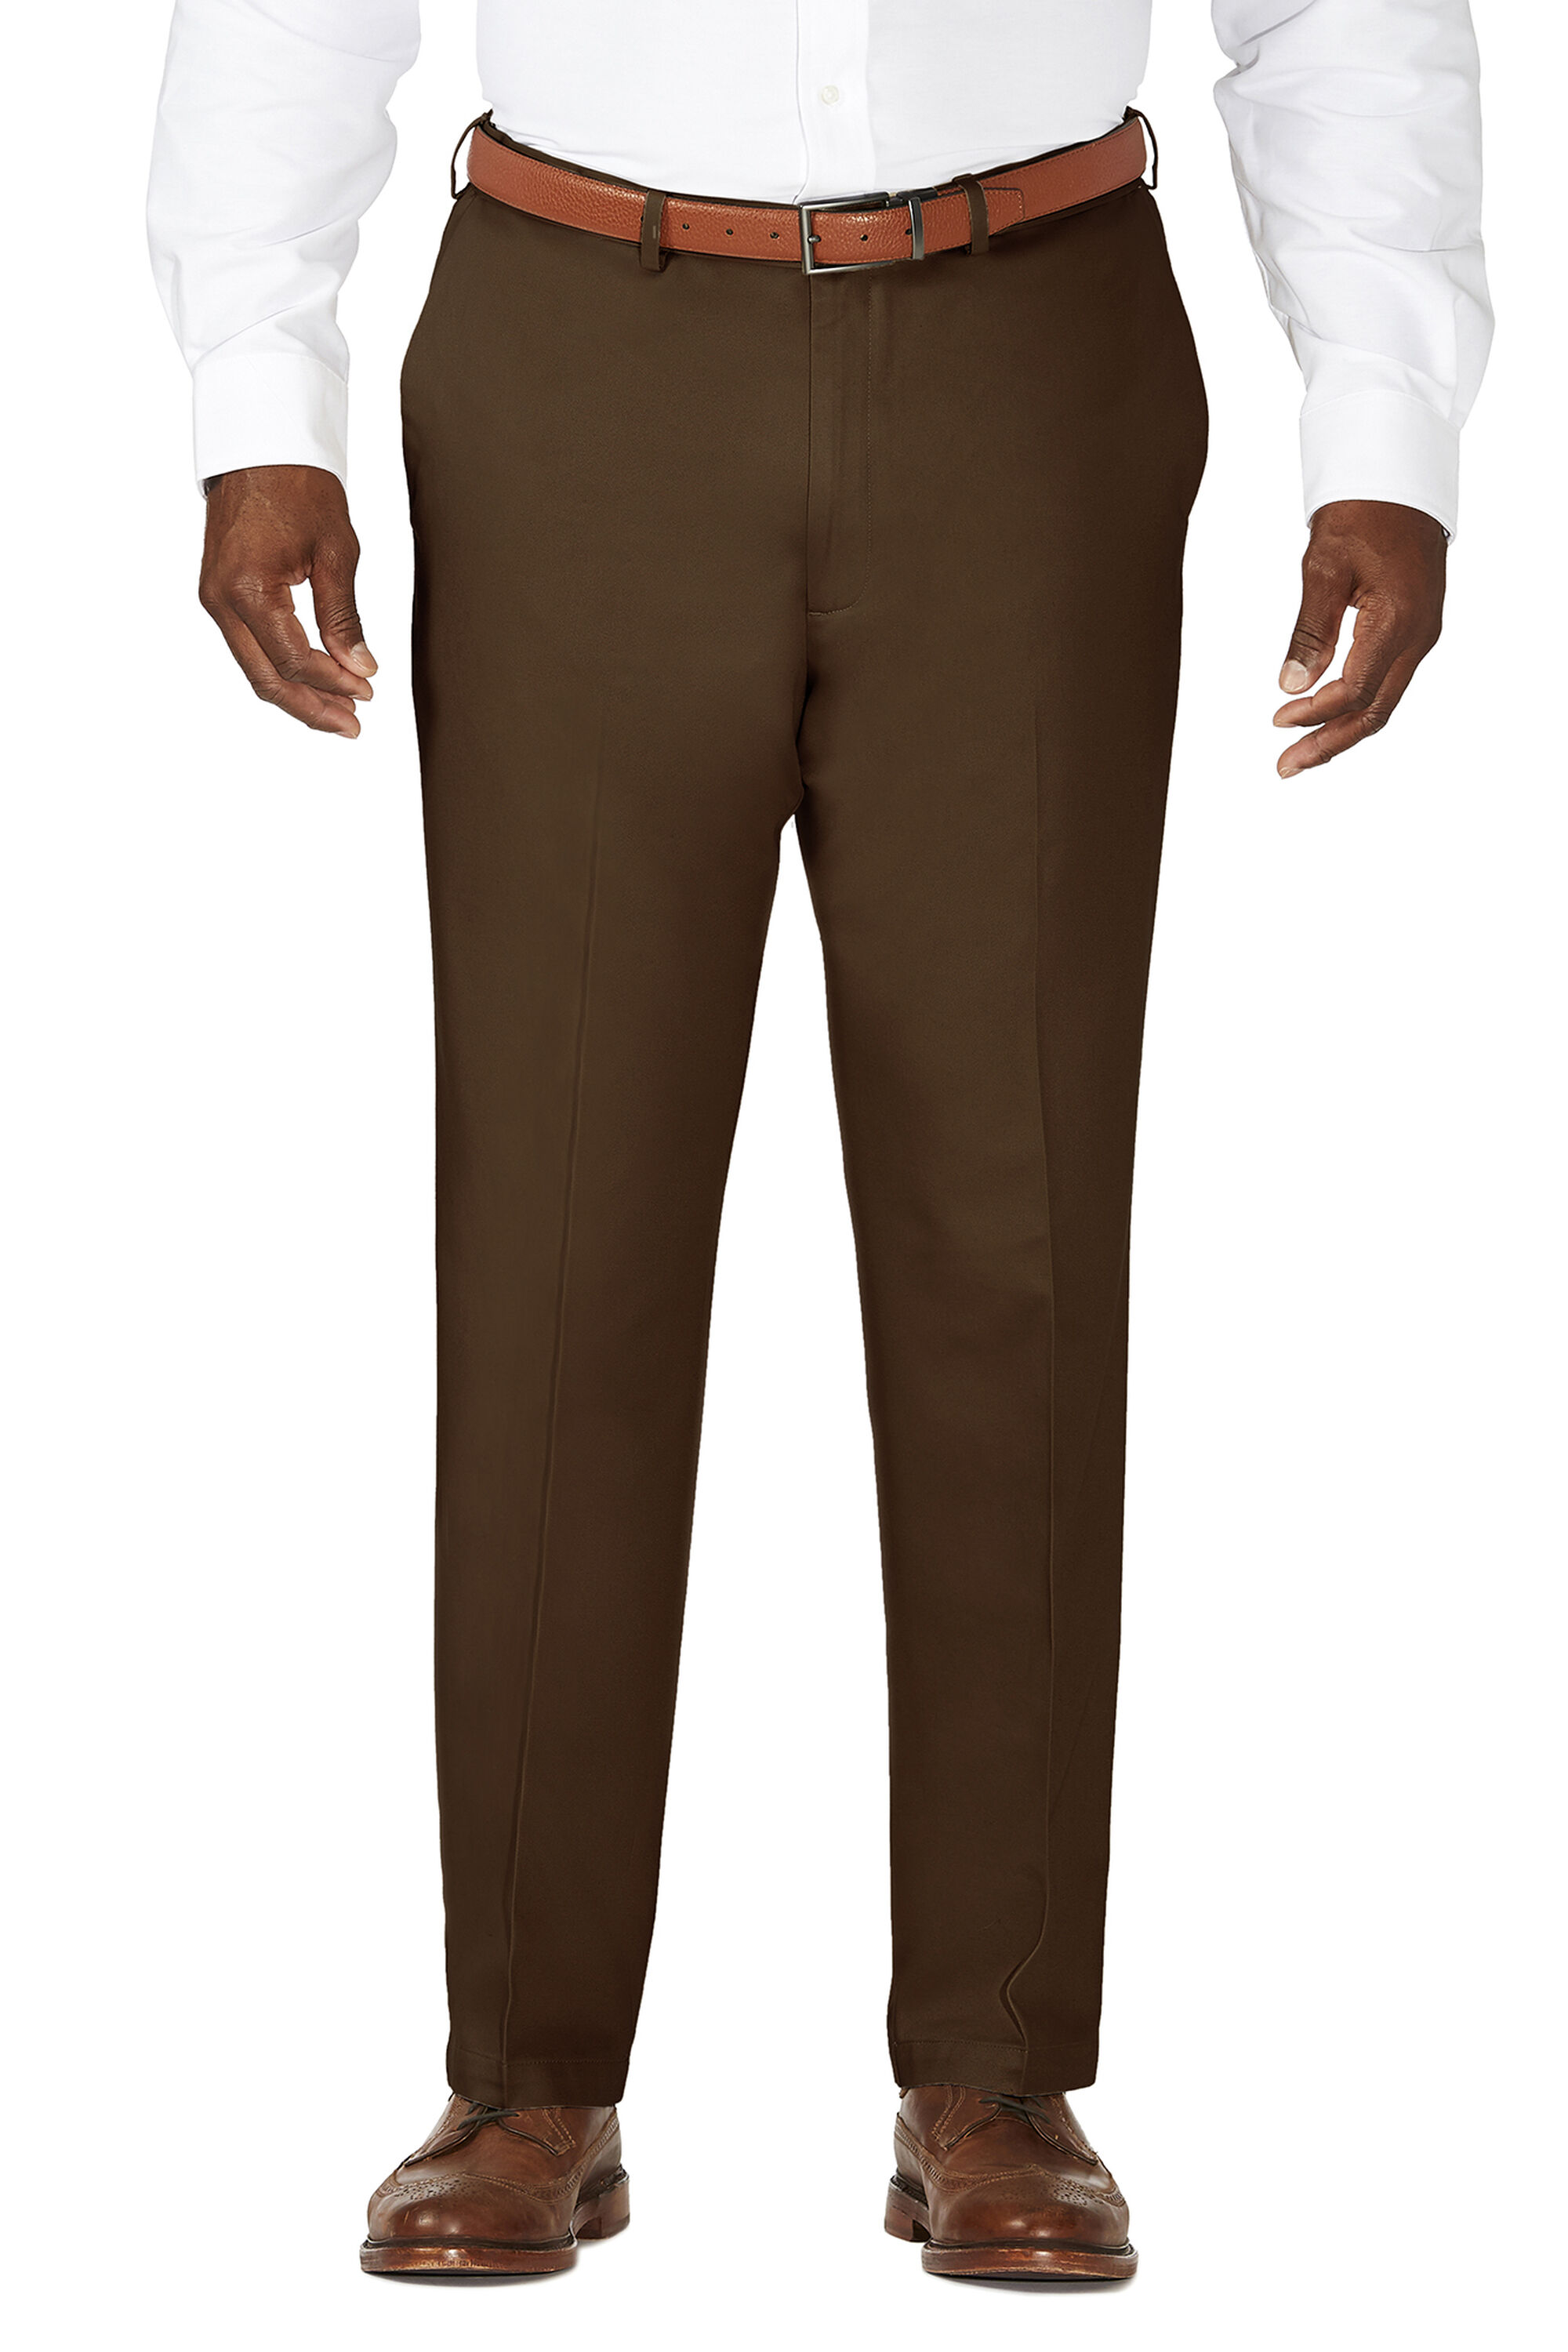 B&T Work to Weekend Khaki | Classic Fit, Flat Front, No Iron | Haggar.com